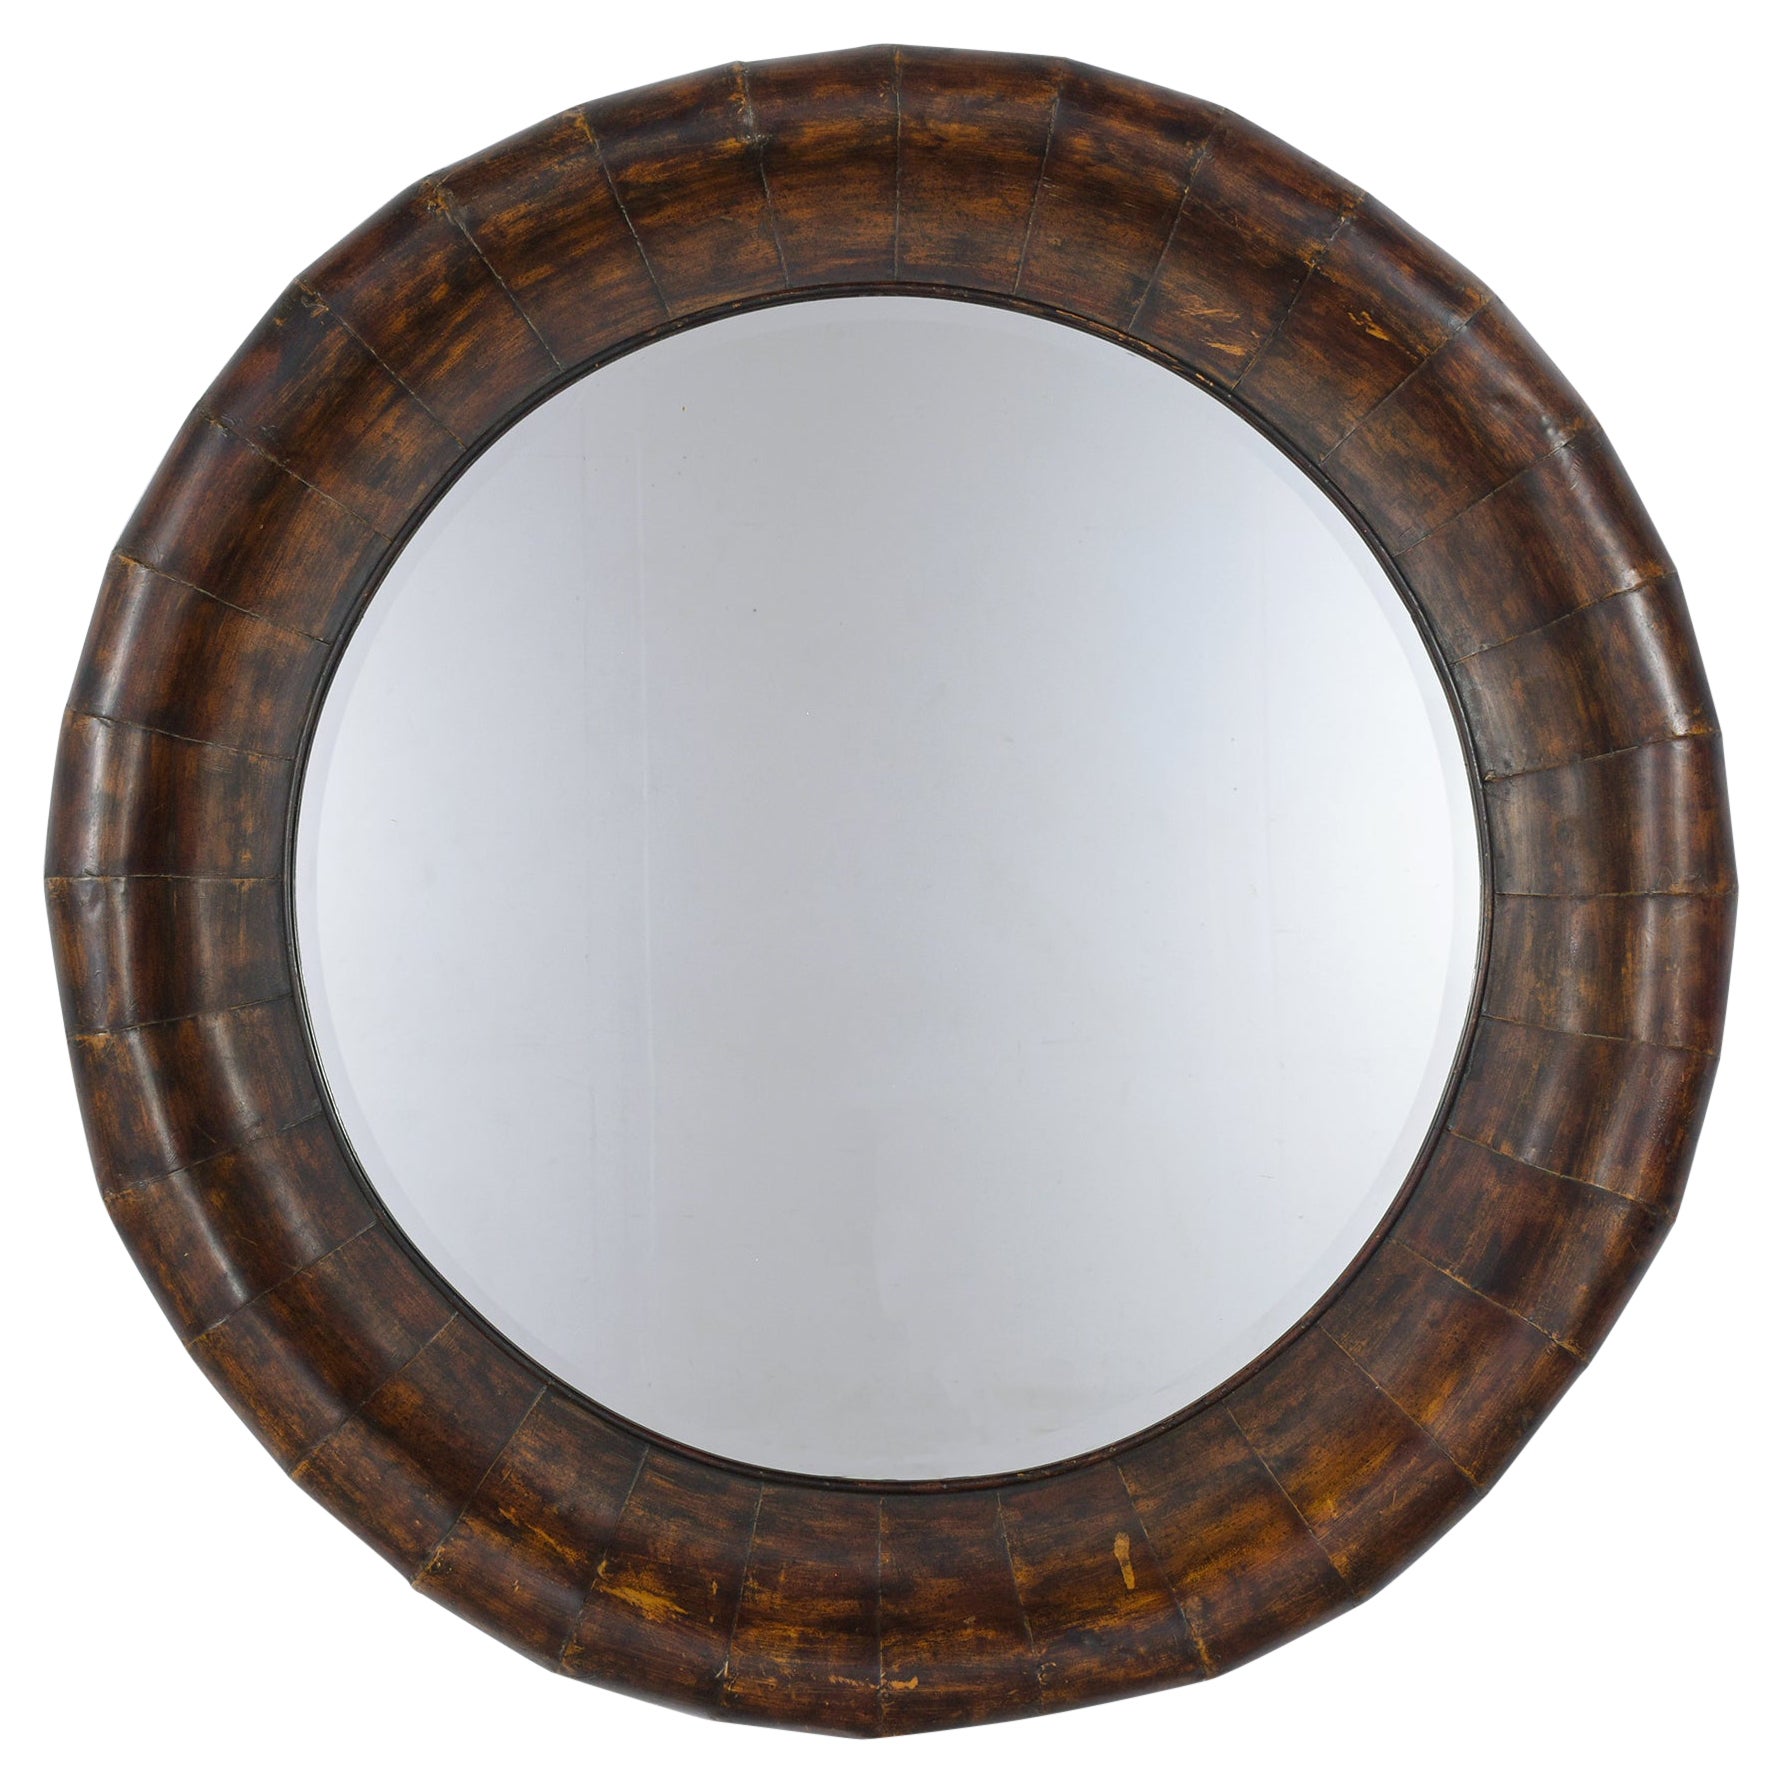 1970s Mid-Century Modern Circular Mirror with Parchment Frame - 40" Diameter For Sale